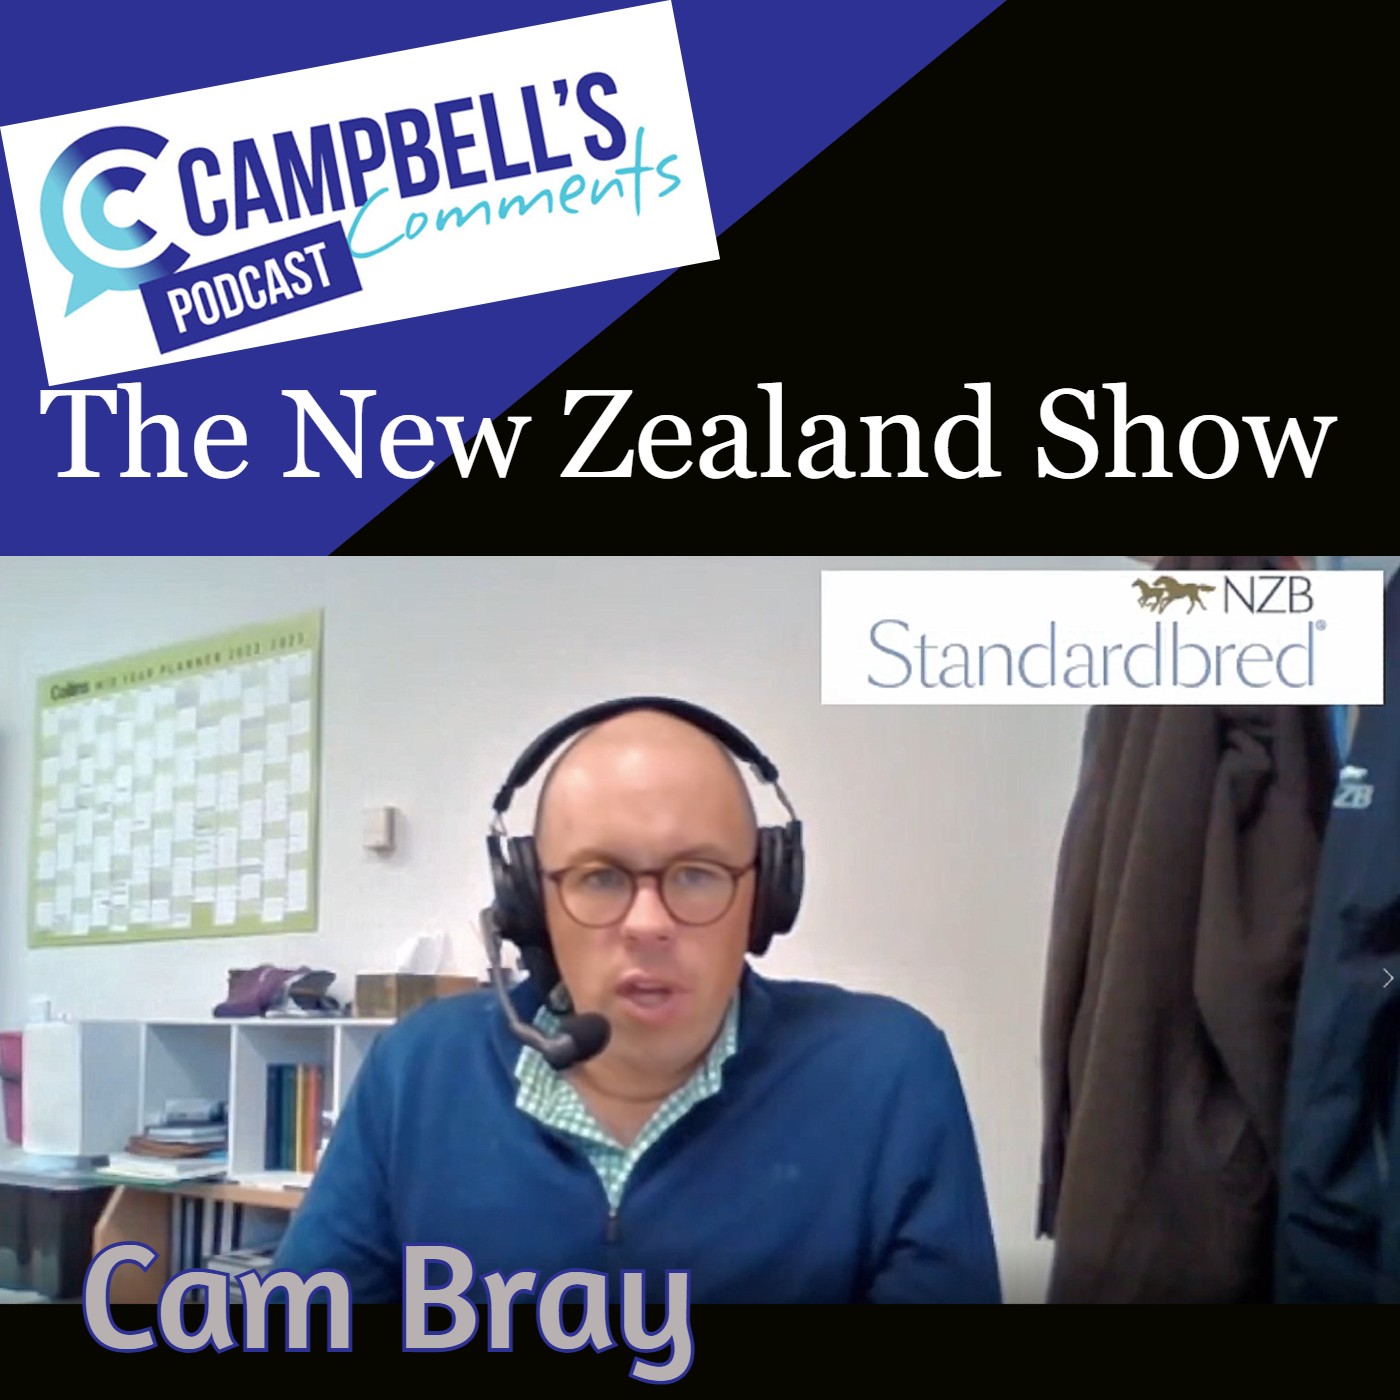 You are currently viewing 164: Campbells Comments New Zealand Show